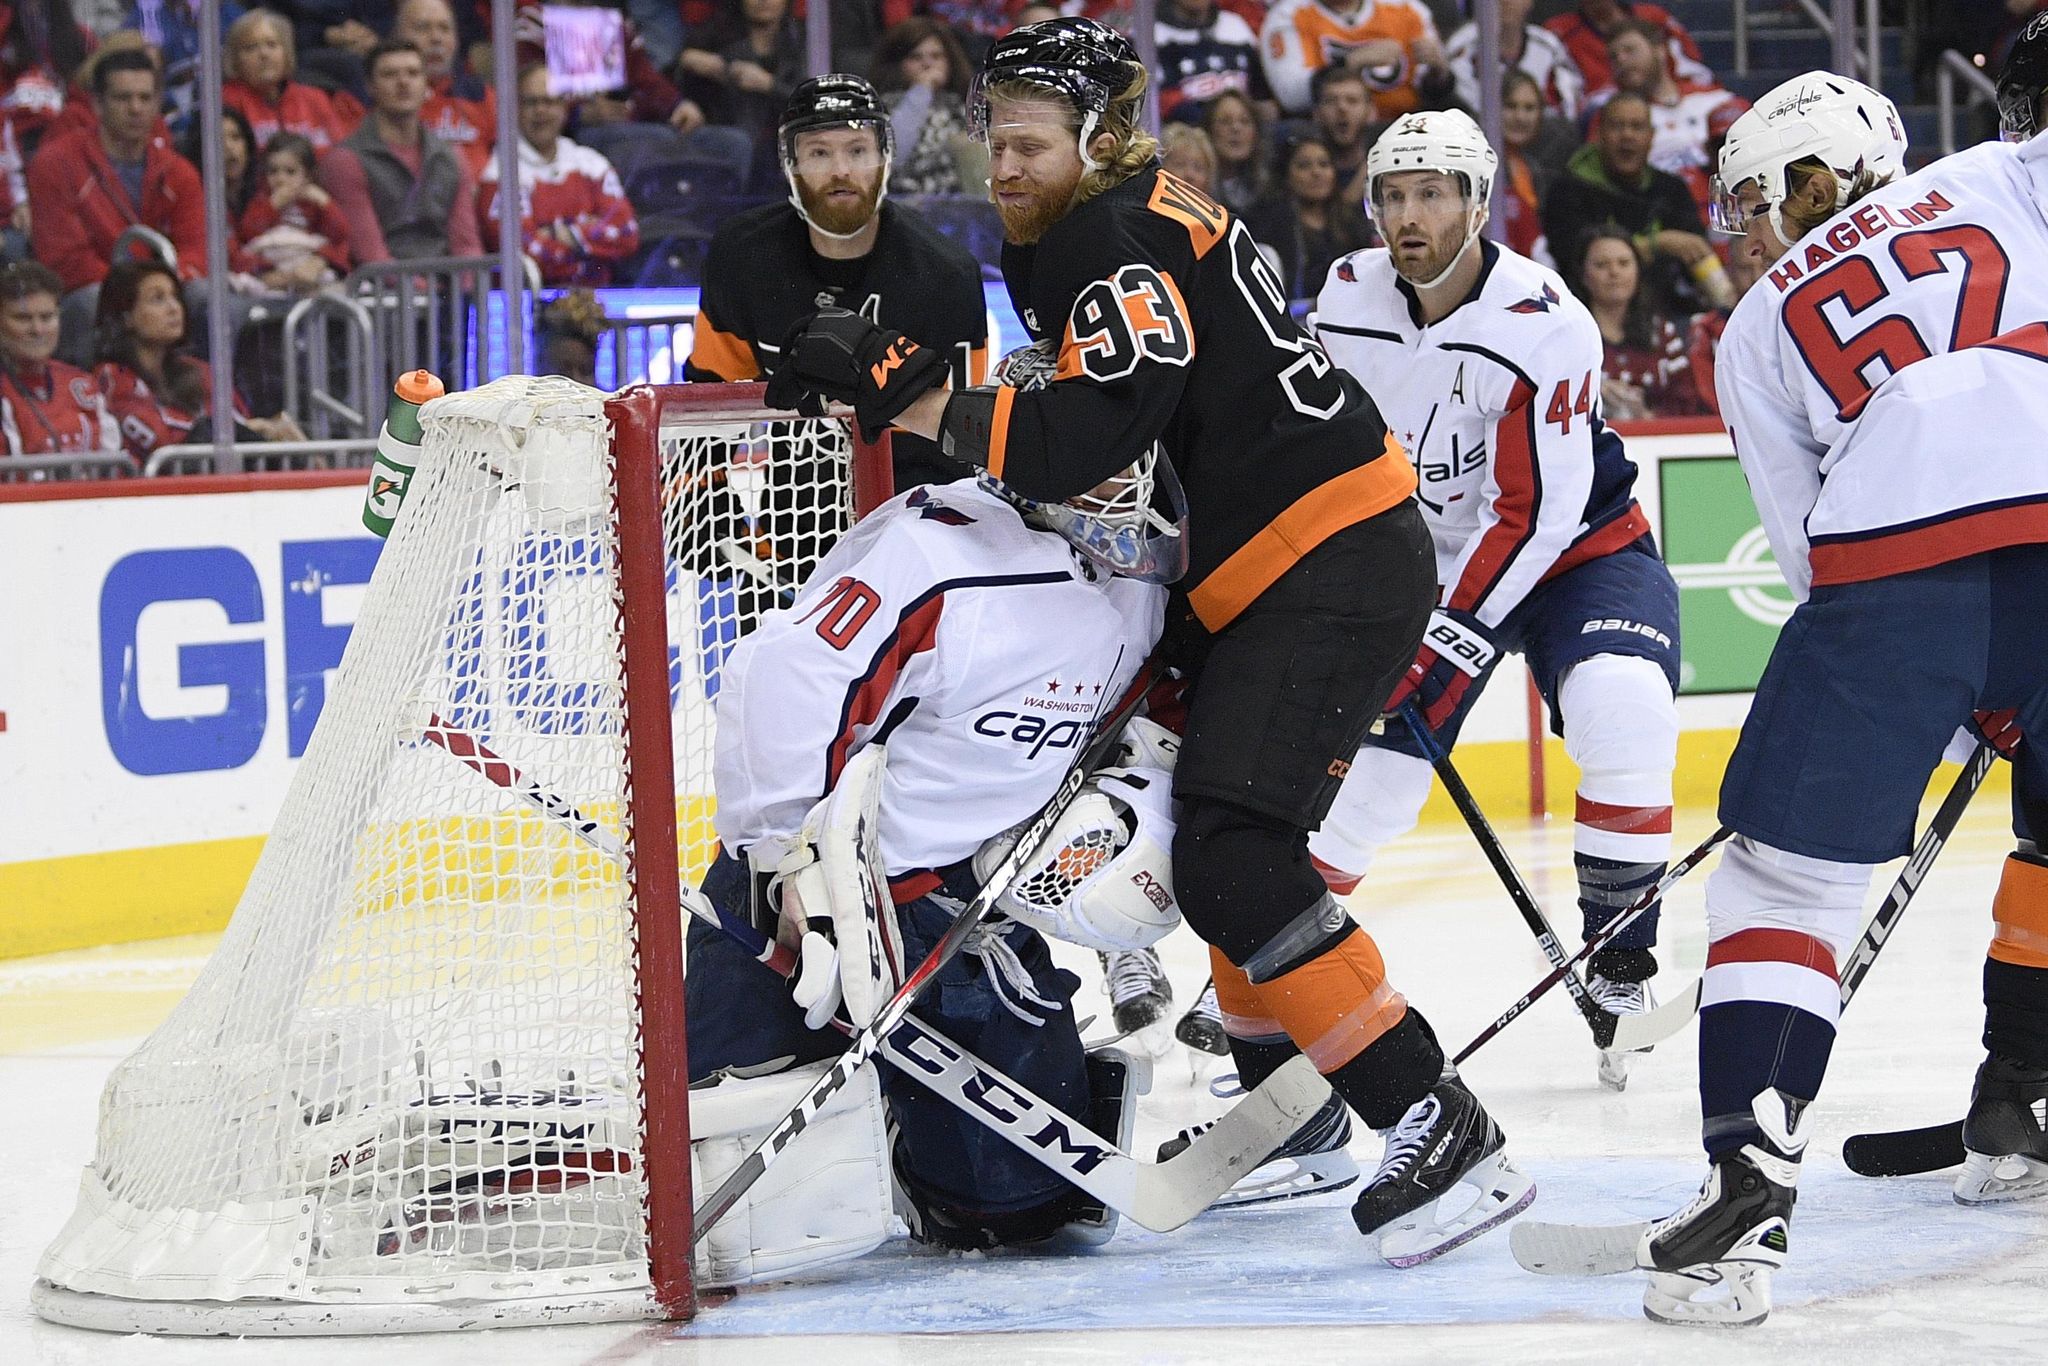 Holtby sharp as Capitals beat Flyers to end losing streak